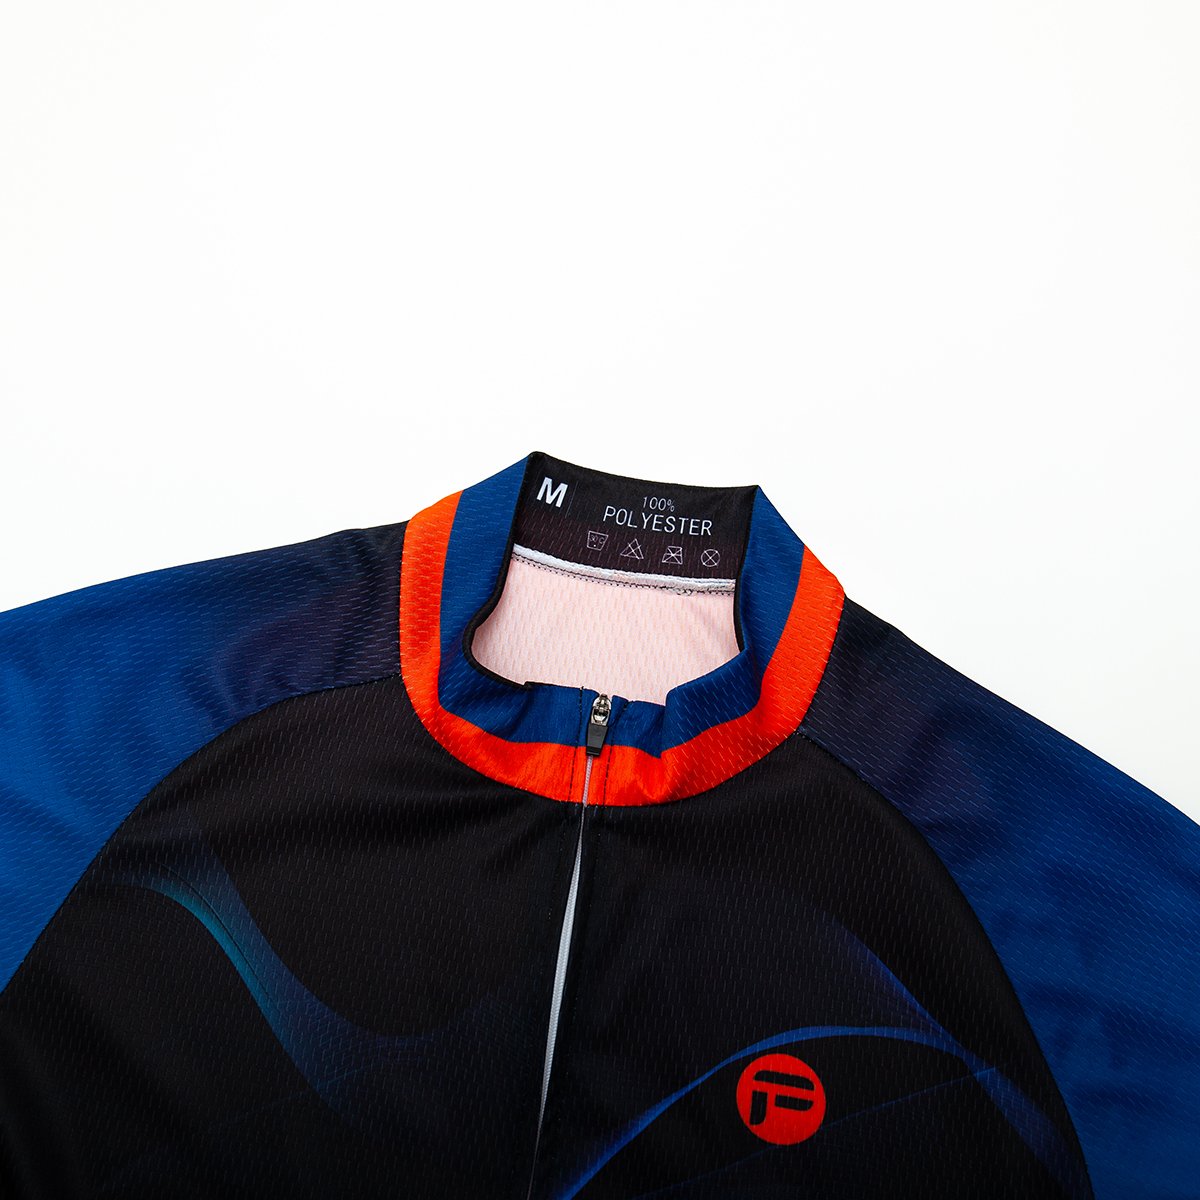 Blue and Orange Waves | Men's Short Sleeve Cycling Jersey